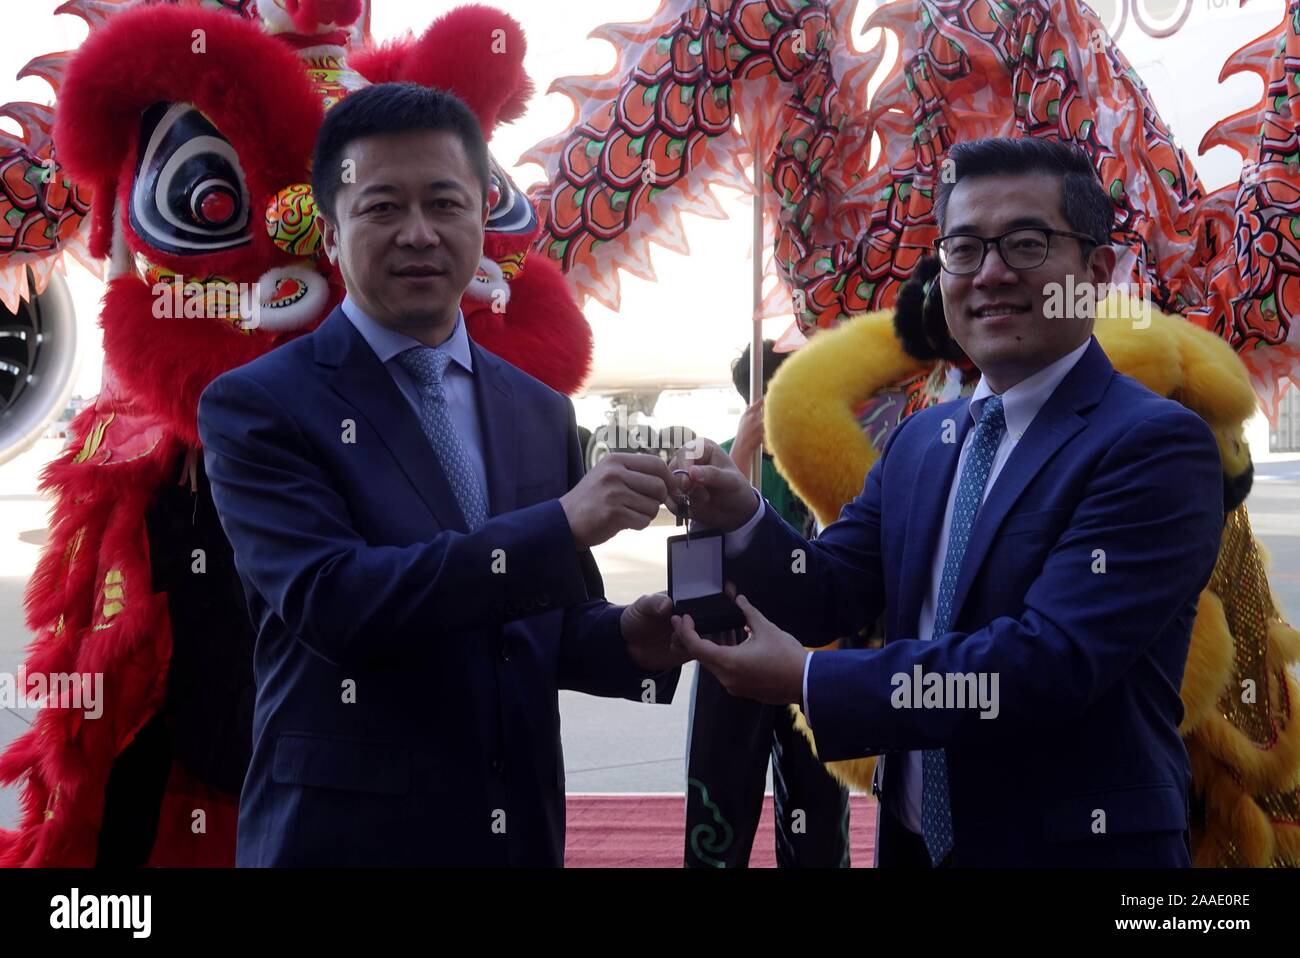 Seattle, USA. 20th Nov, 2019. Peter Gao (R), vice president of Commercial Sales and Marketing for China at Boeing, and Feng Jiangtao, representative from Juneyao Airlines, attend the delivery ceremony of a Boeing 787-9 Dreamliner, in Seattle, Washington state, the United States, Nov. 20, 2019. U.S. aircraft giant Boeing Company on Wednesday delivered the sixth 787-9 Dreamliner to China's Juneyao Airlines, the 100th direct-buy 787 jet by the Chinese airline industry. Credit: Wu Xiaoling/Xinhua/Alamy Live News Stock Photo